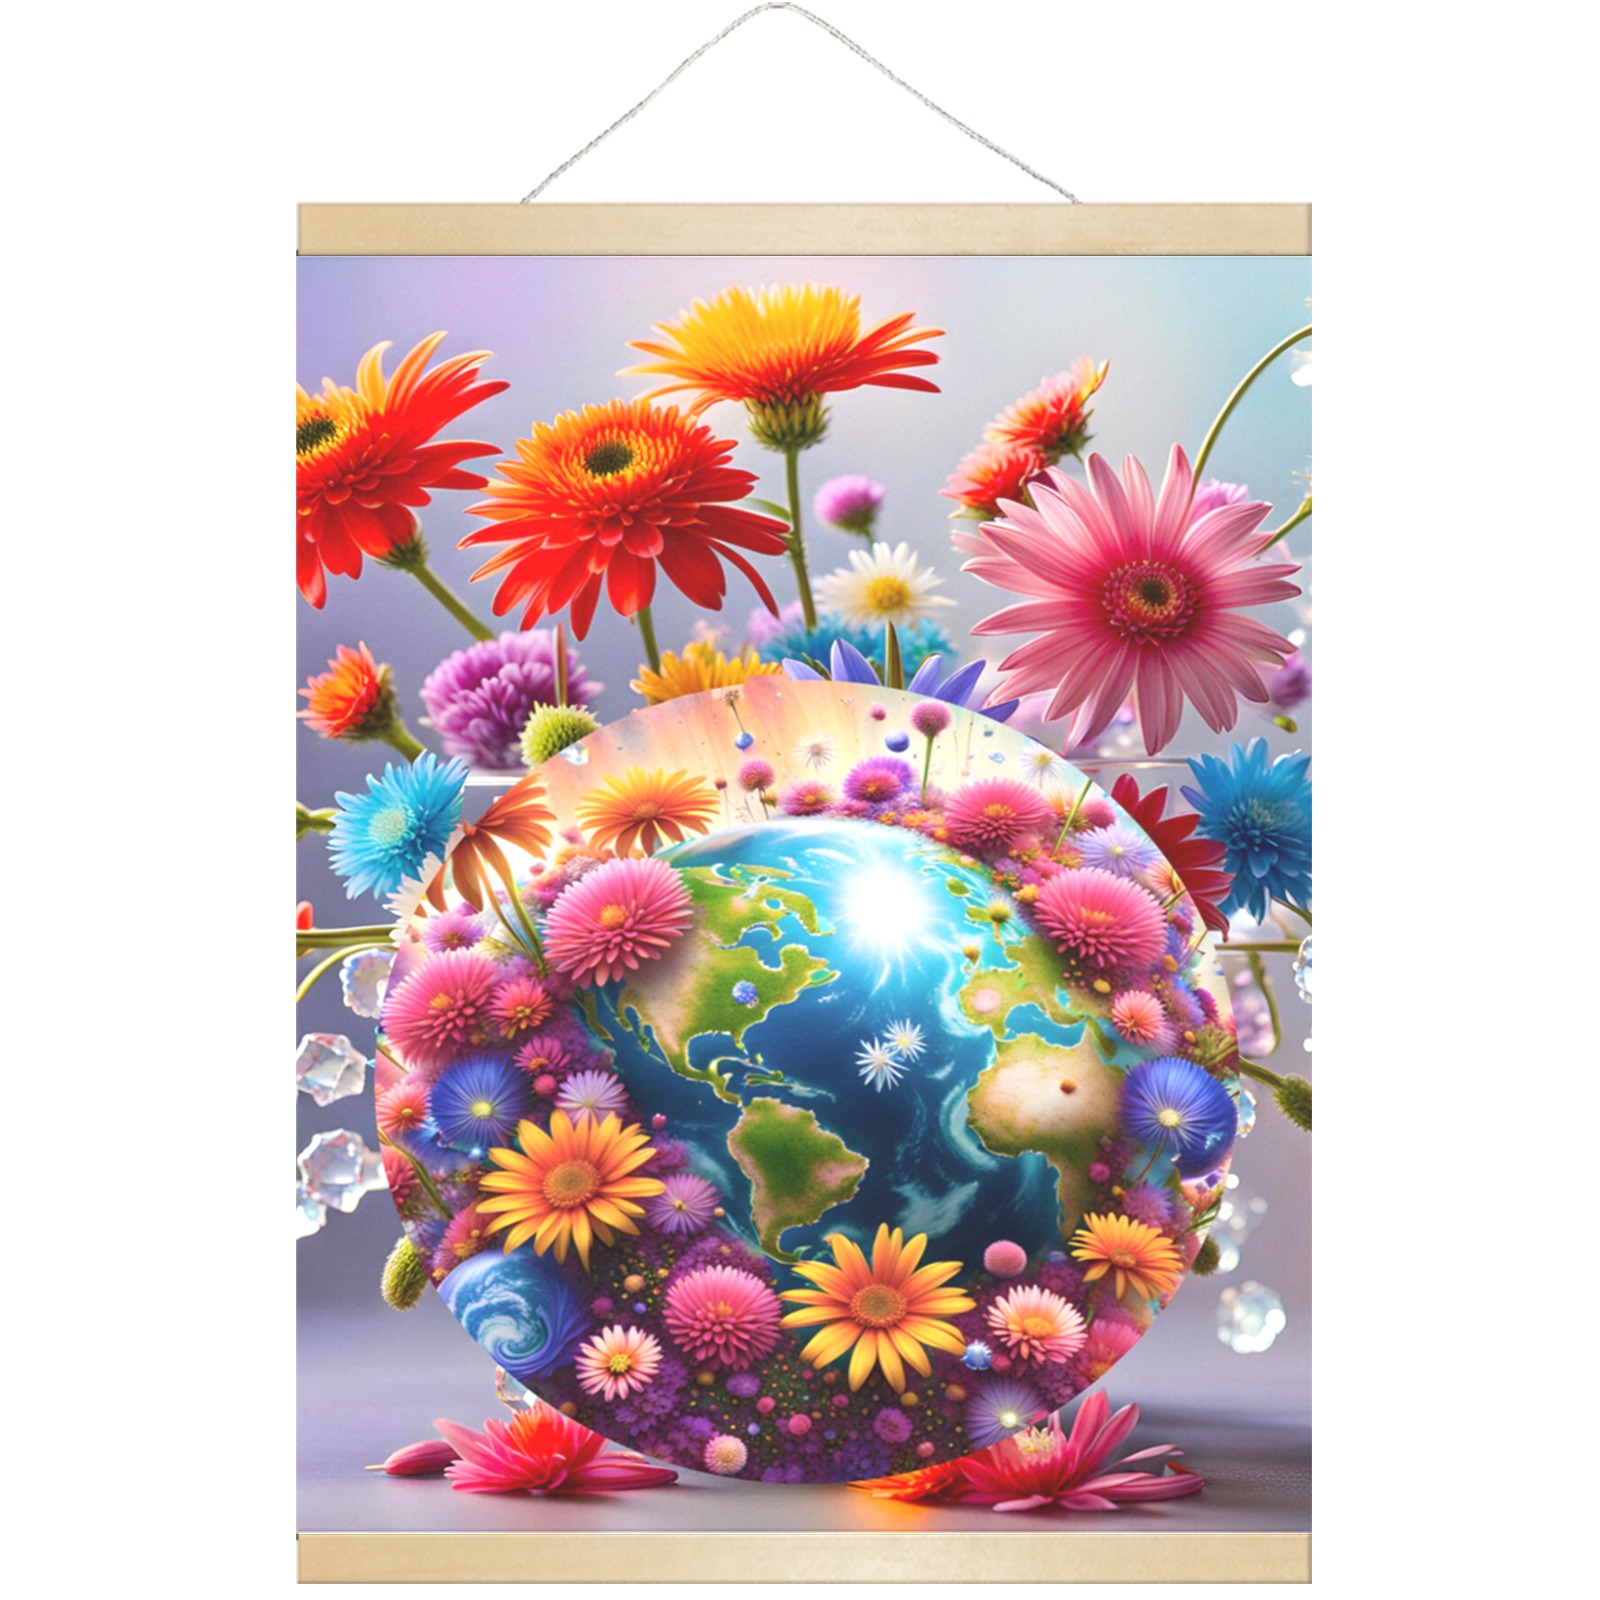 Planet Earth Hanging Poster 18"x24"